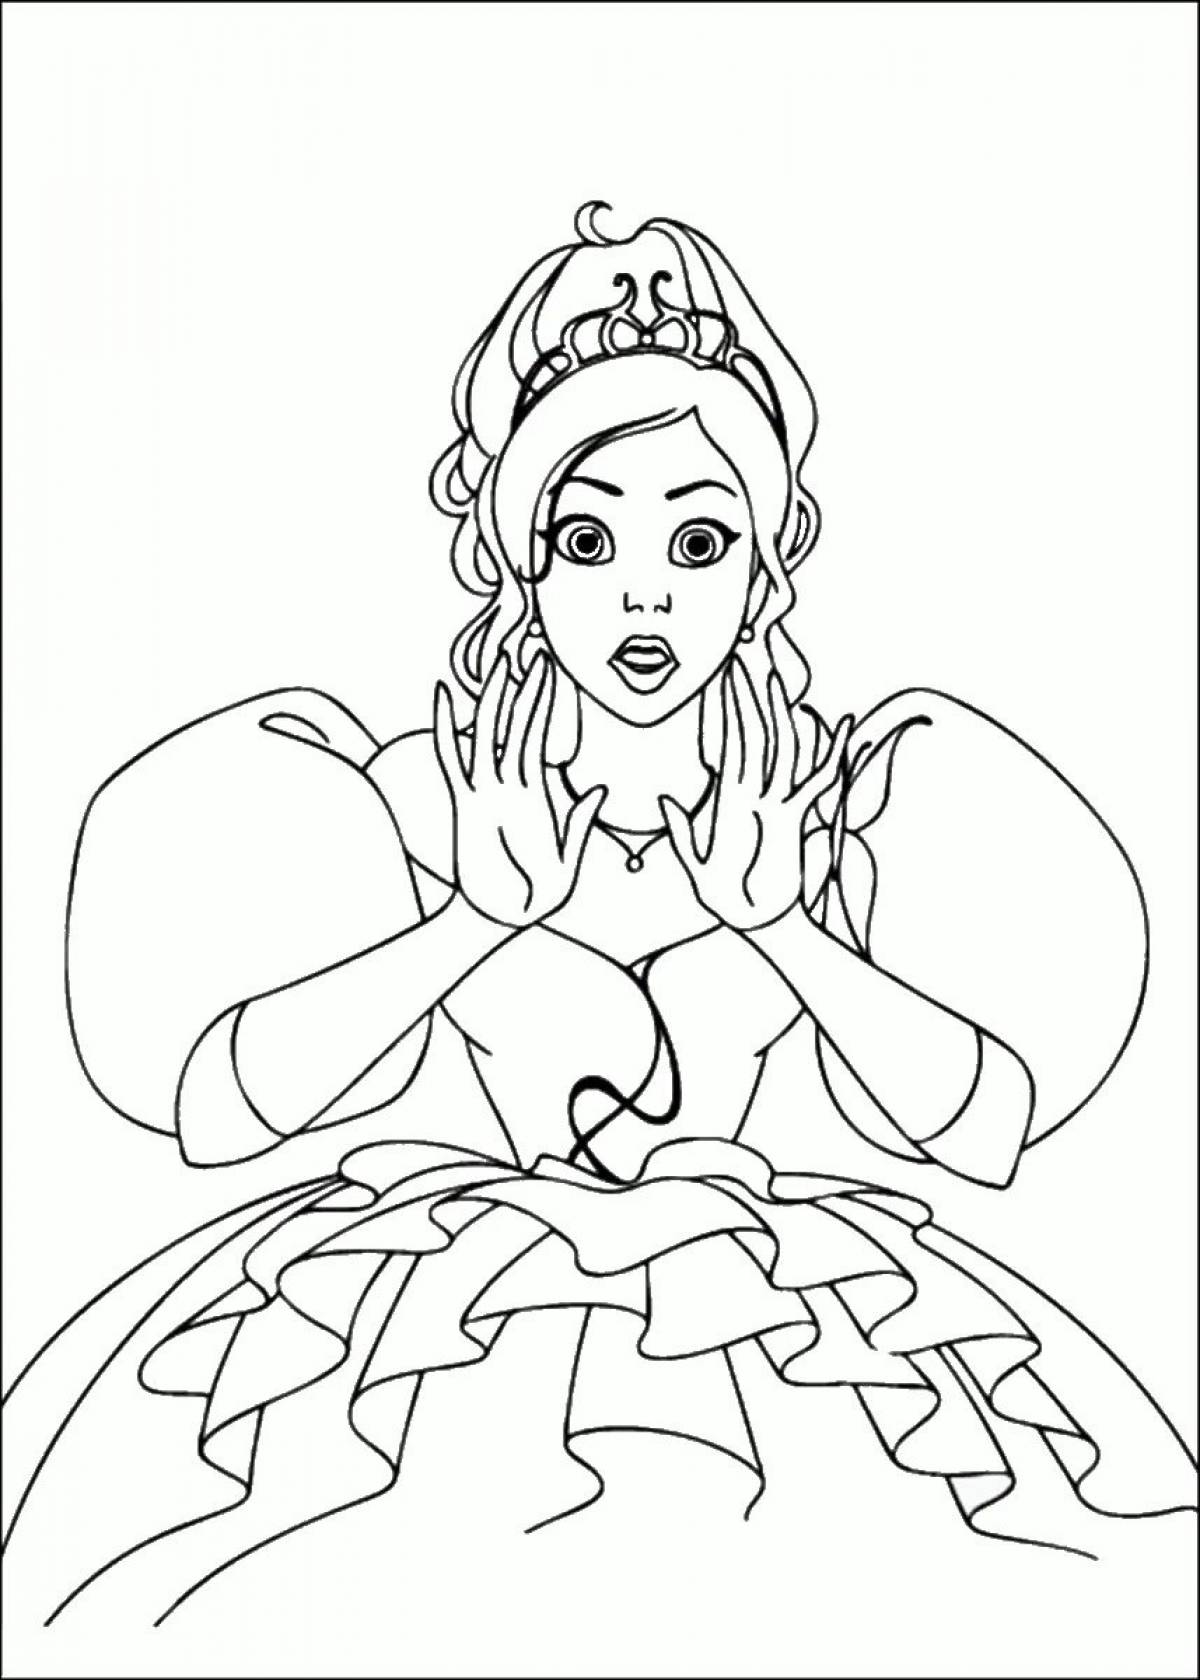 Luminous coloring page turn on princesses